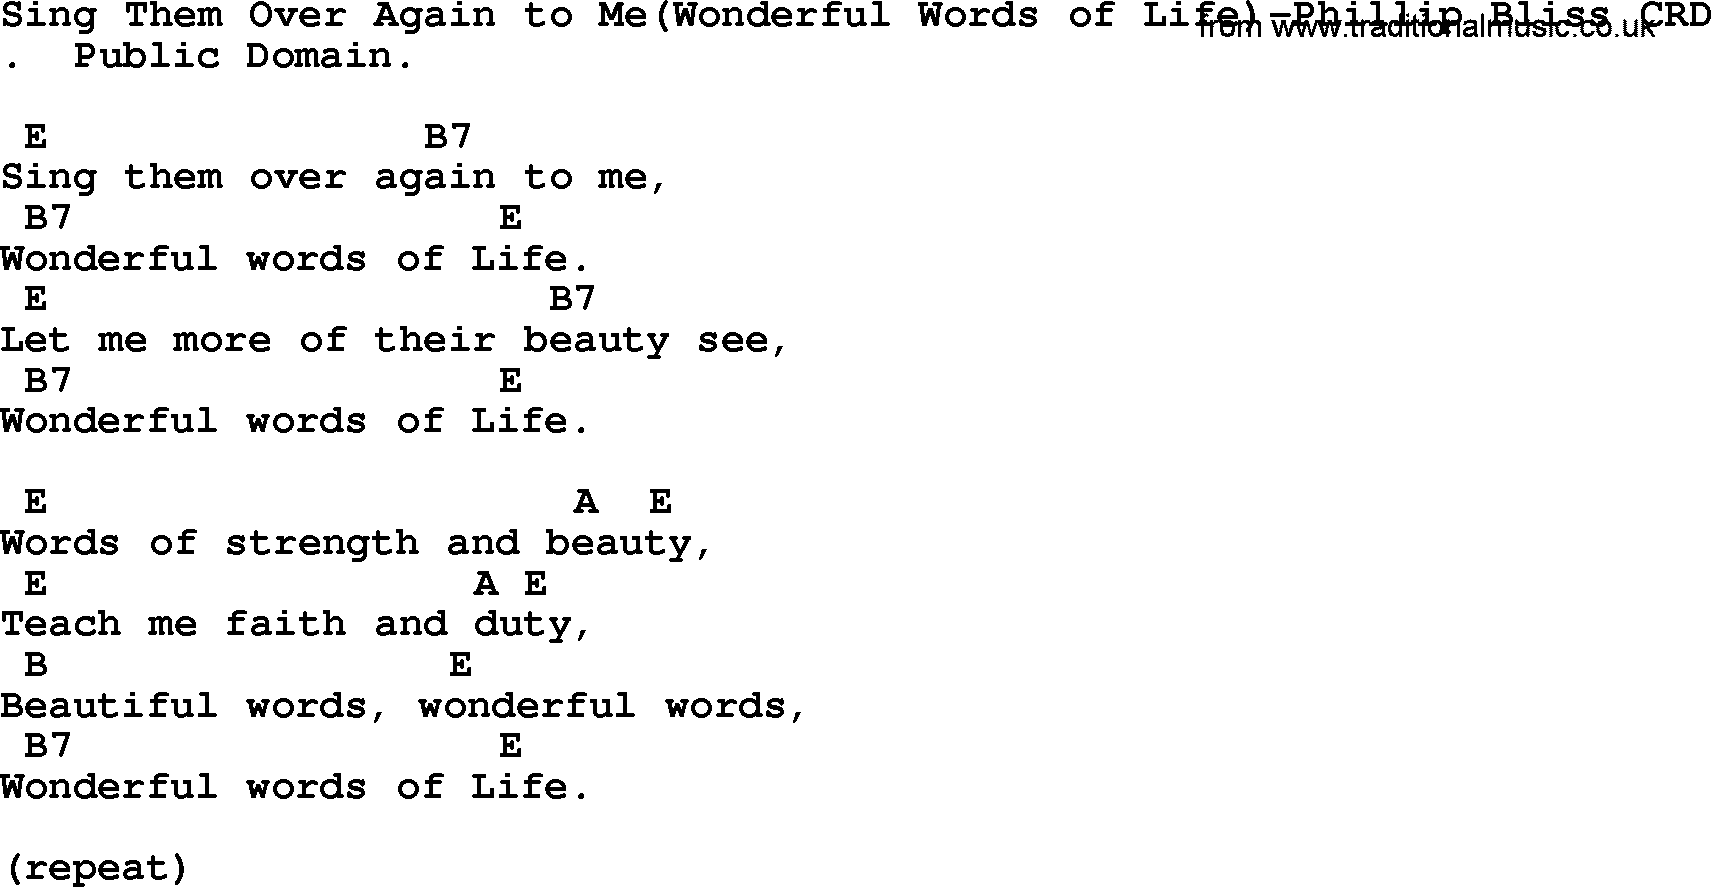 Gospel Song: Sing Them Over Again To Me(Wonderful Words Of Life)-Phillip Bliss, lyrics and chords.